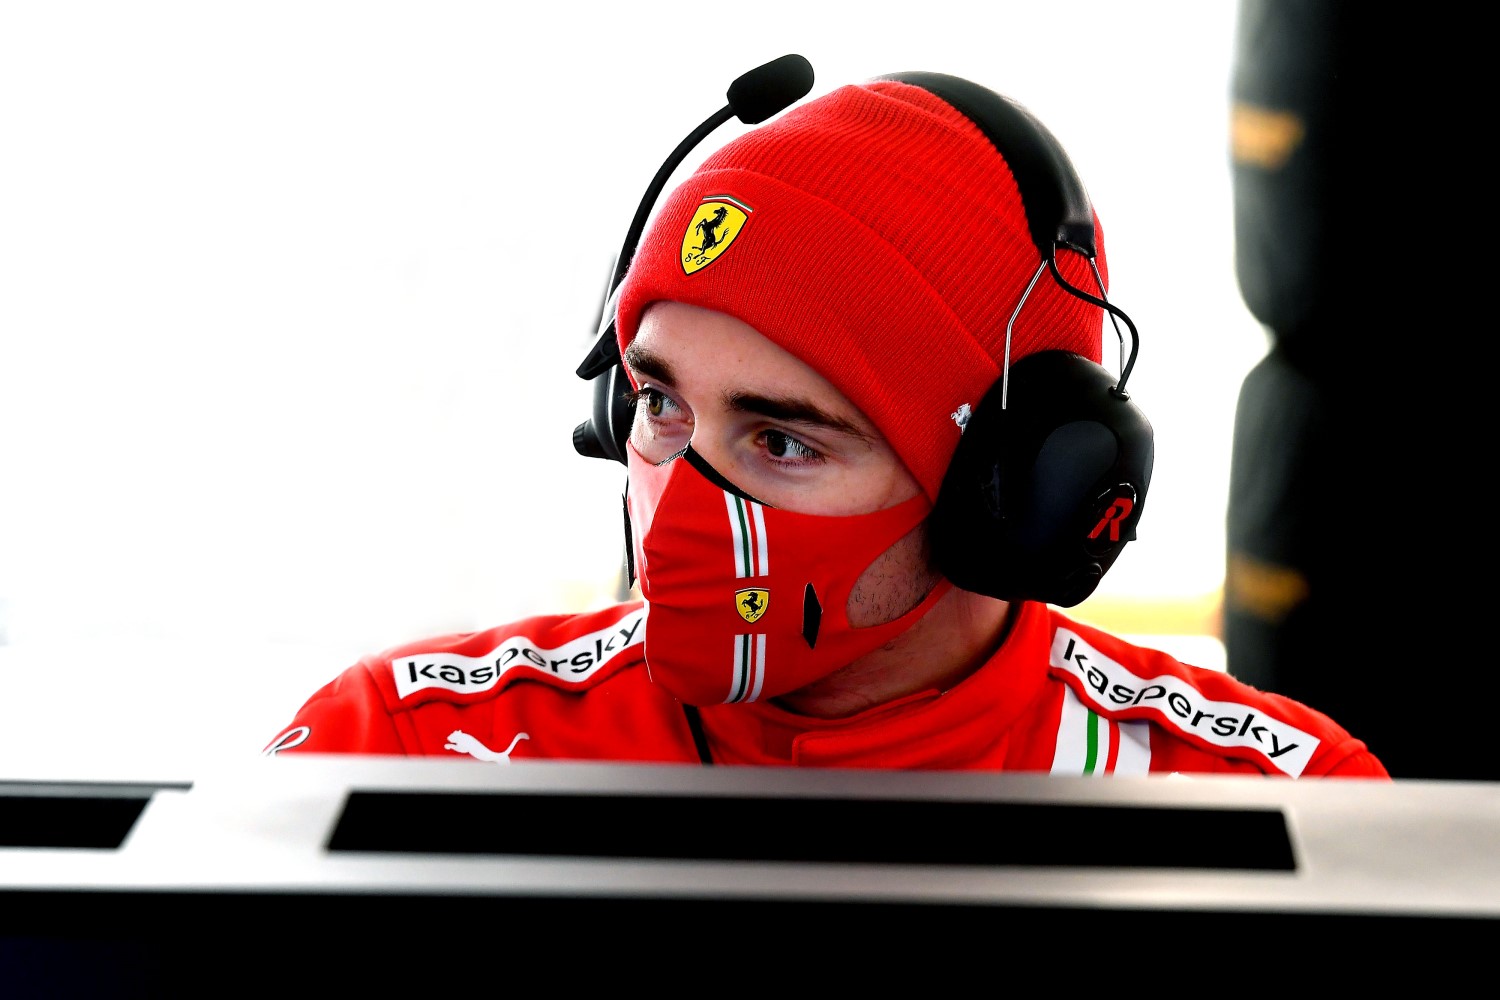 Exclusive Day 2: Charles Leclerc Tuesday PM photos from Fiorano